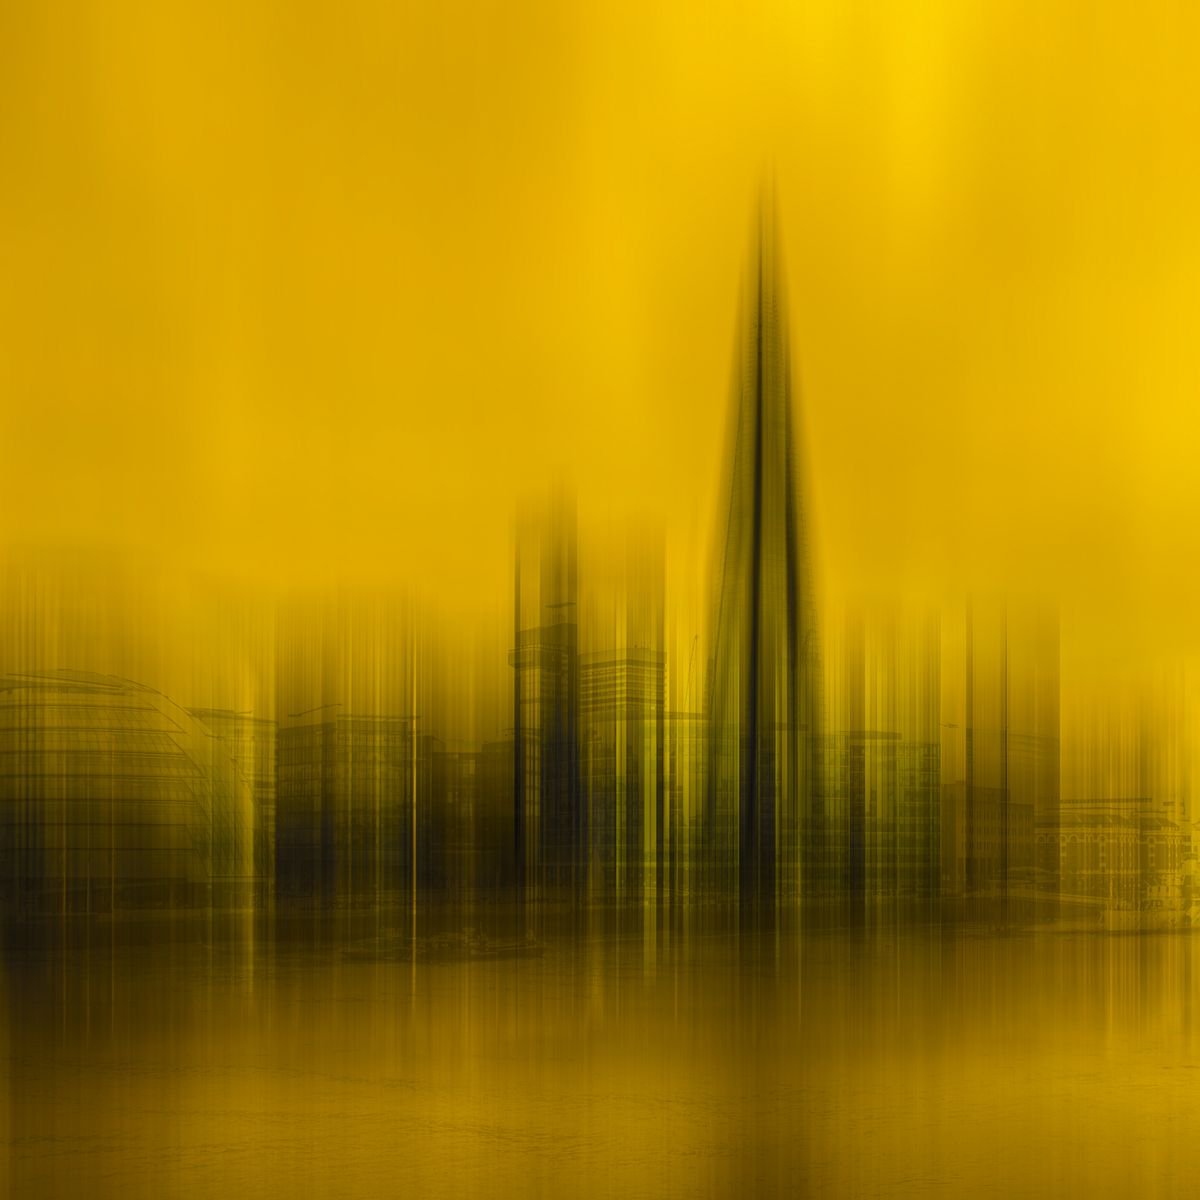 Abstract London: The Shard by Graham Briggs